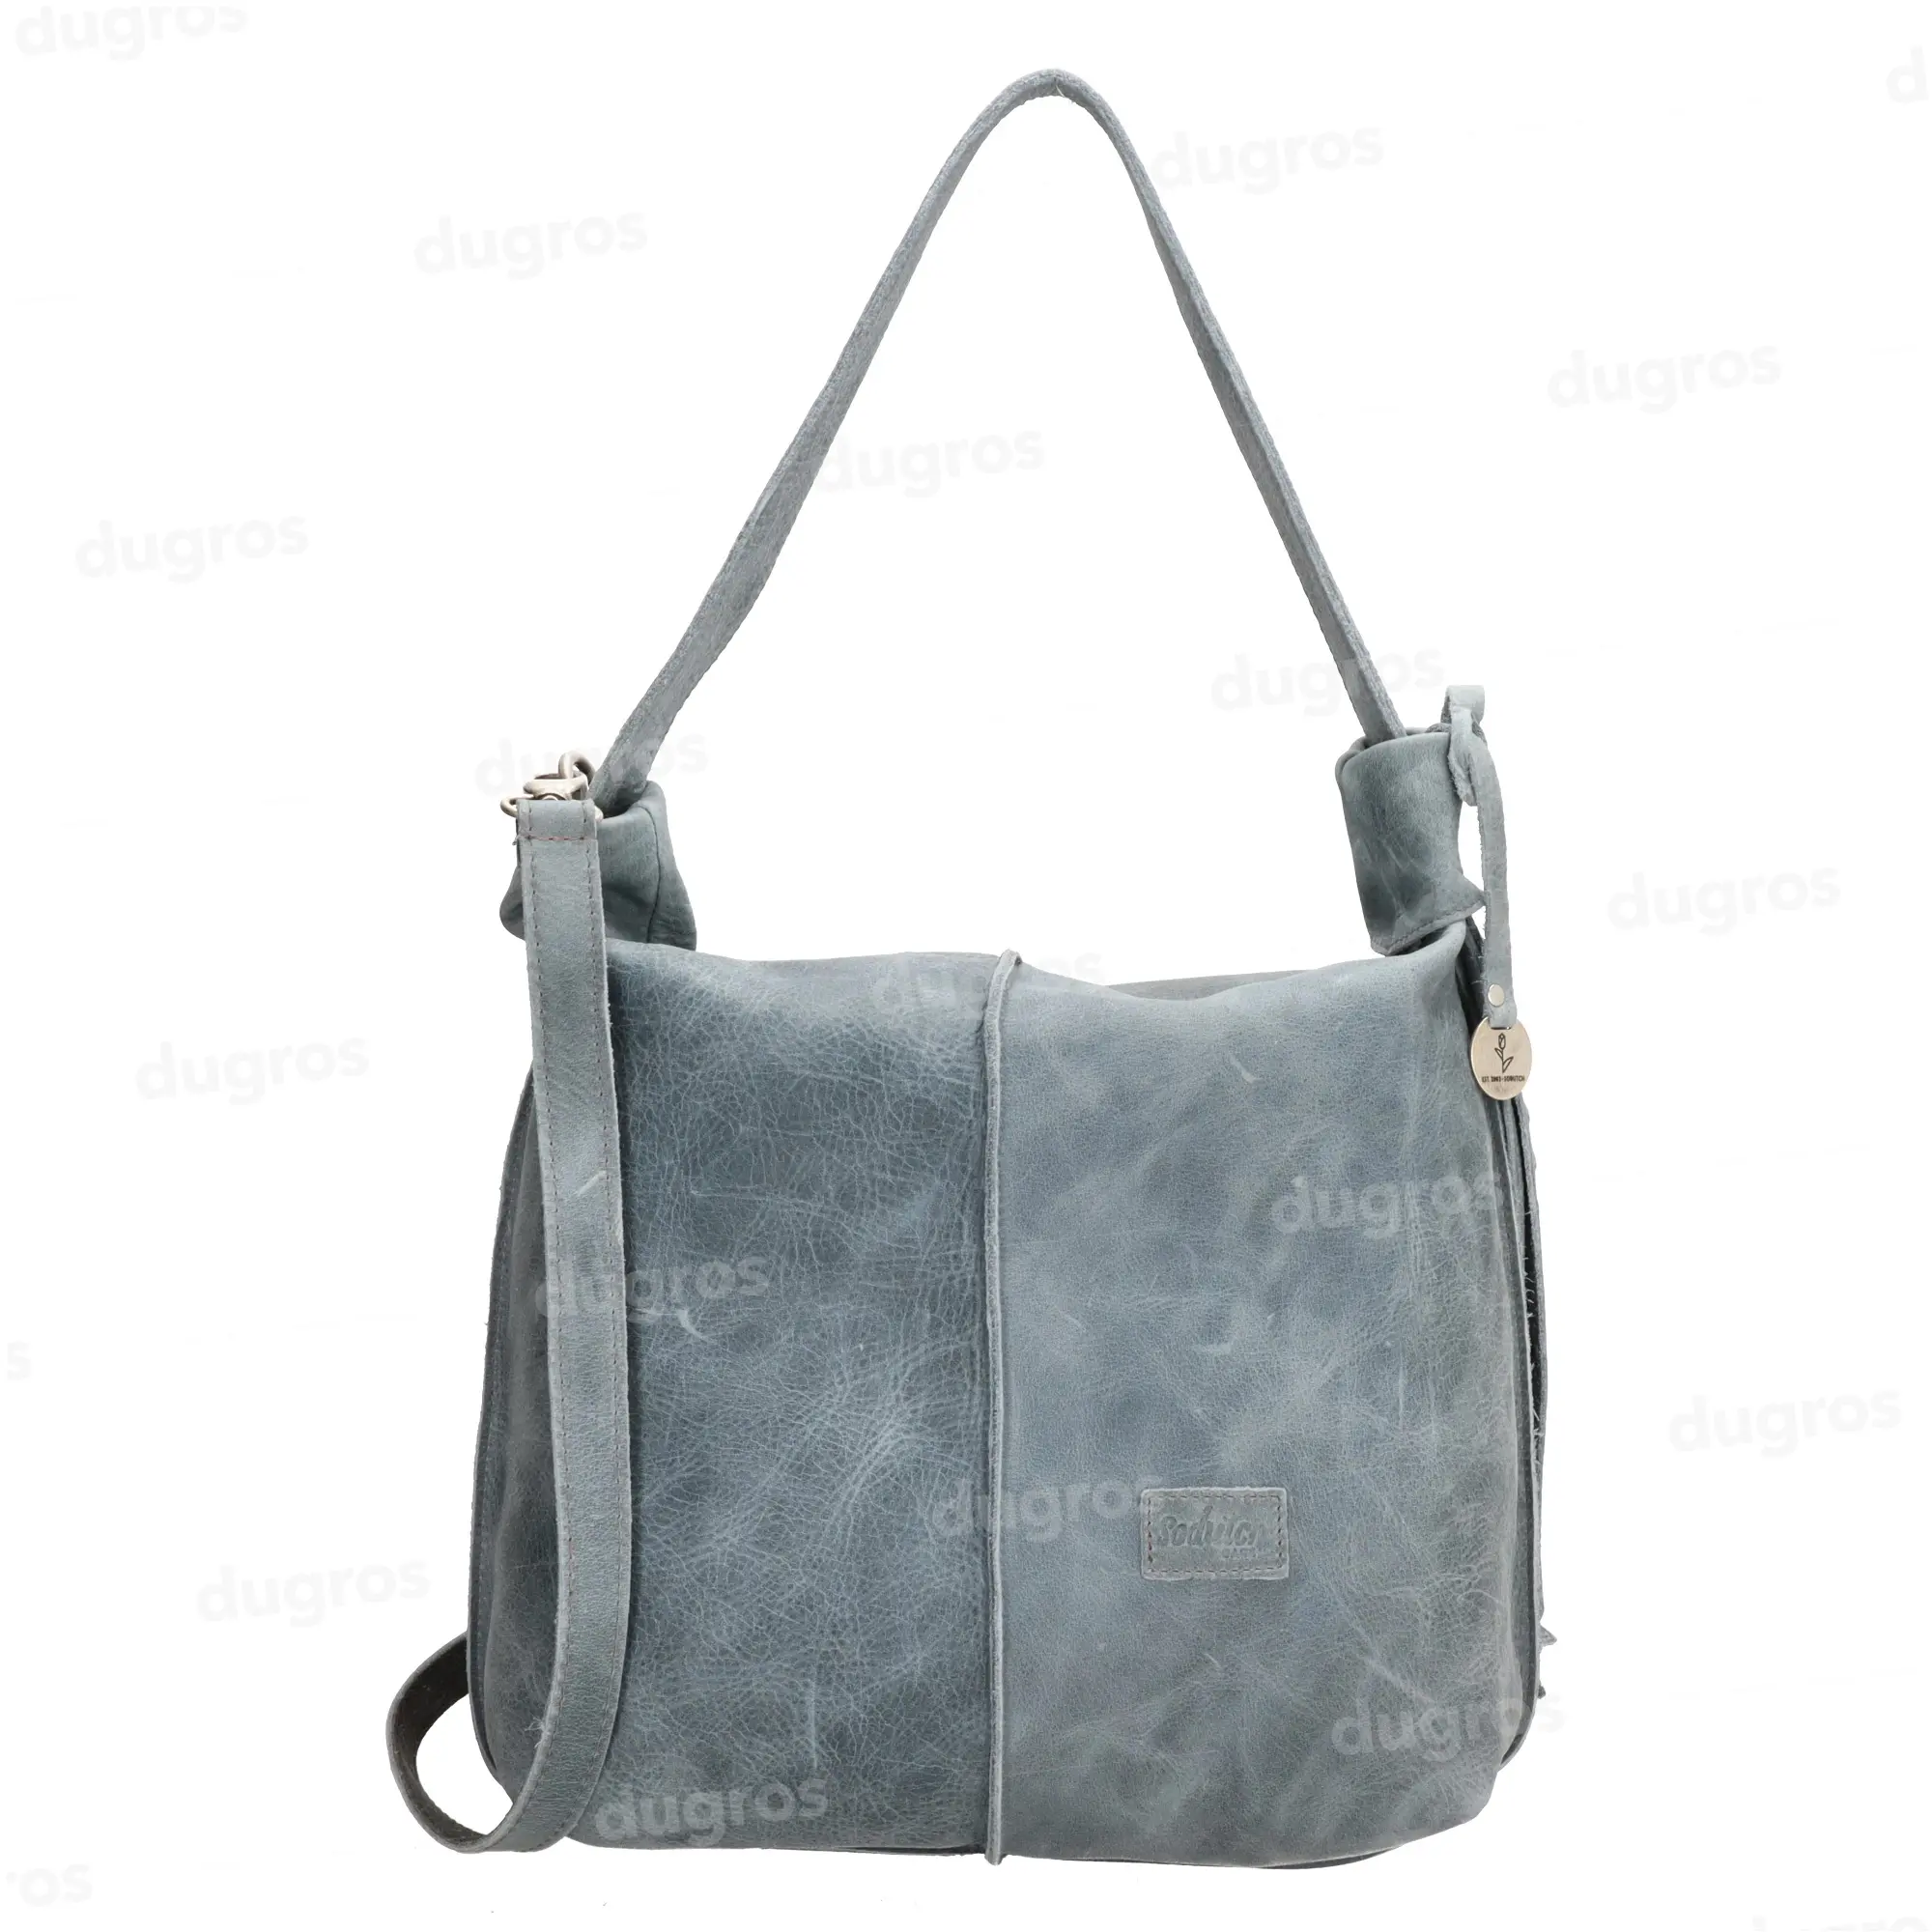 High Quality stylish practical shoulder bag women lady bag dutch cow leather fashion made in the Netherlands